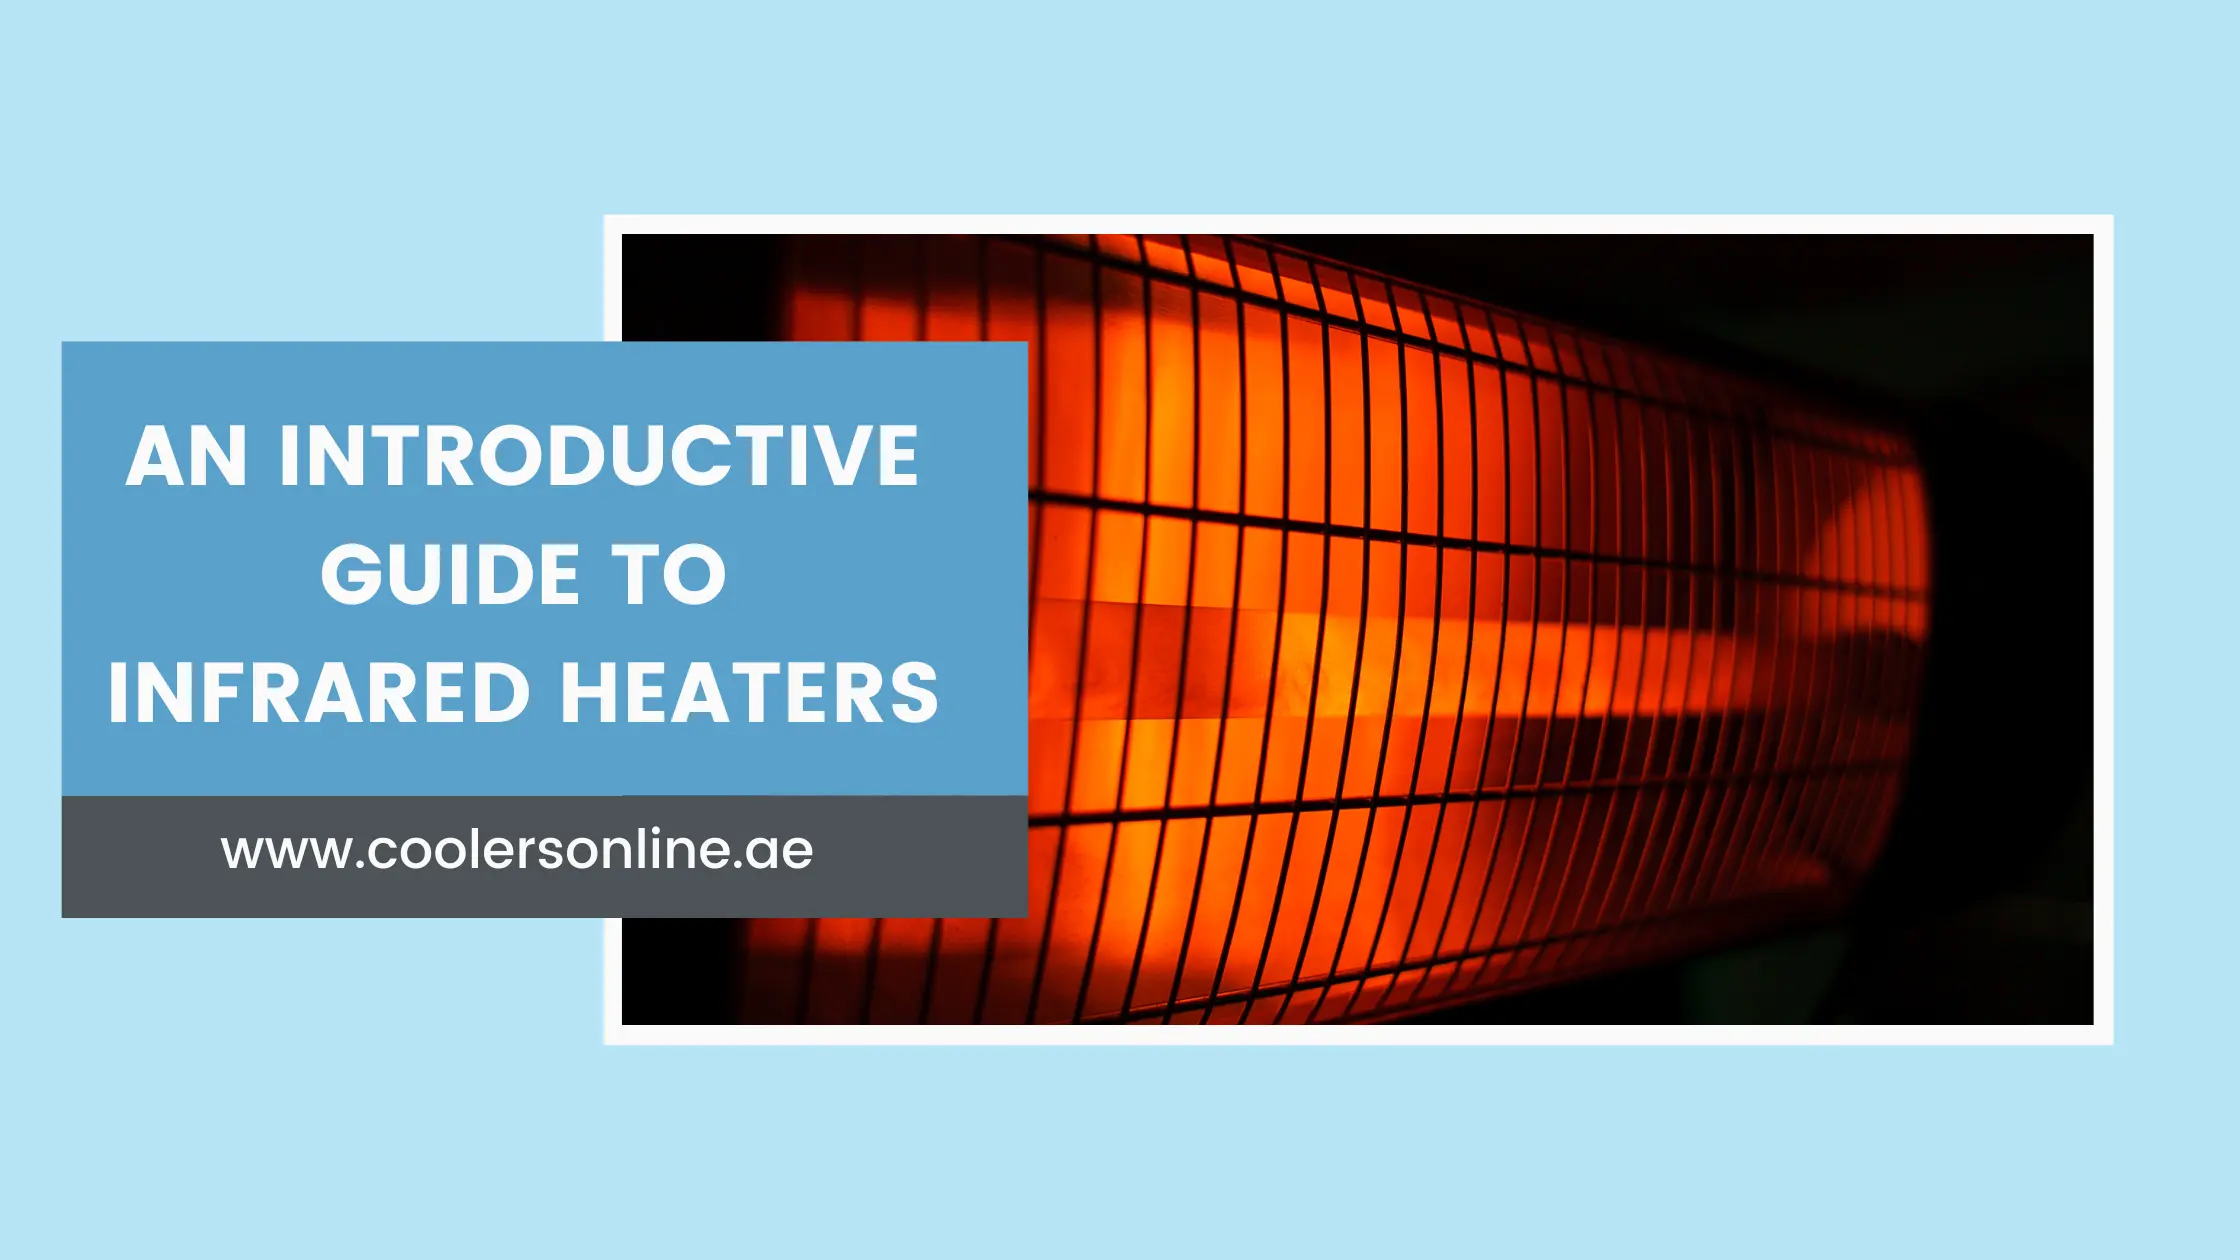 An Introductive Guide to Infrared Heaters